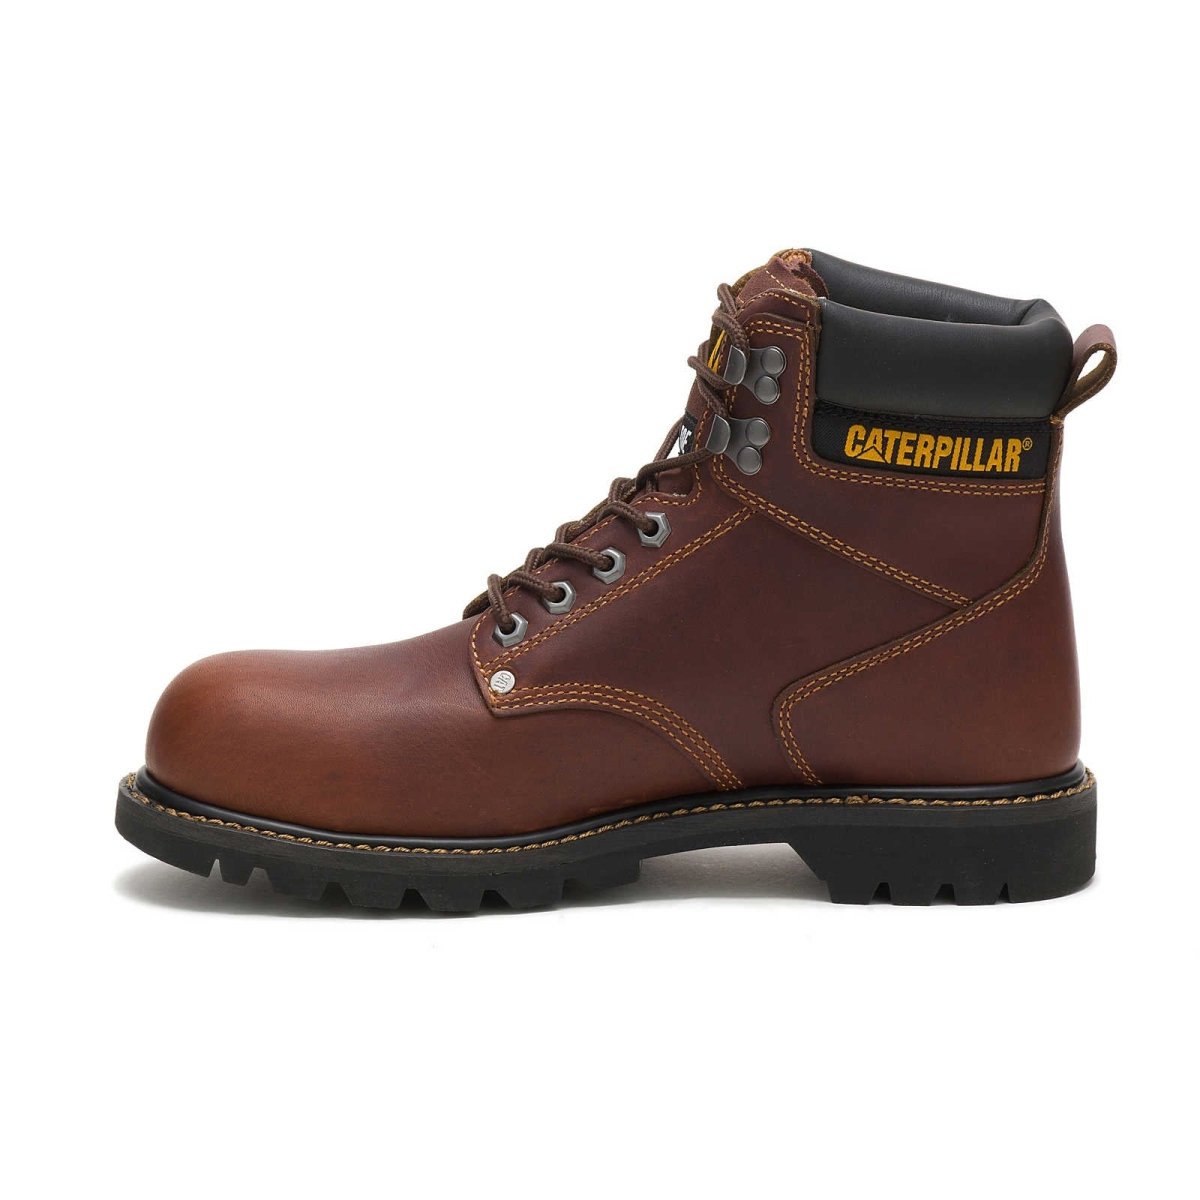 CATERPILLAR SECOND SHIFT STEEL TOE MEN'S WORK BOOT (P89817) IN TAN - TLW Shoes